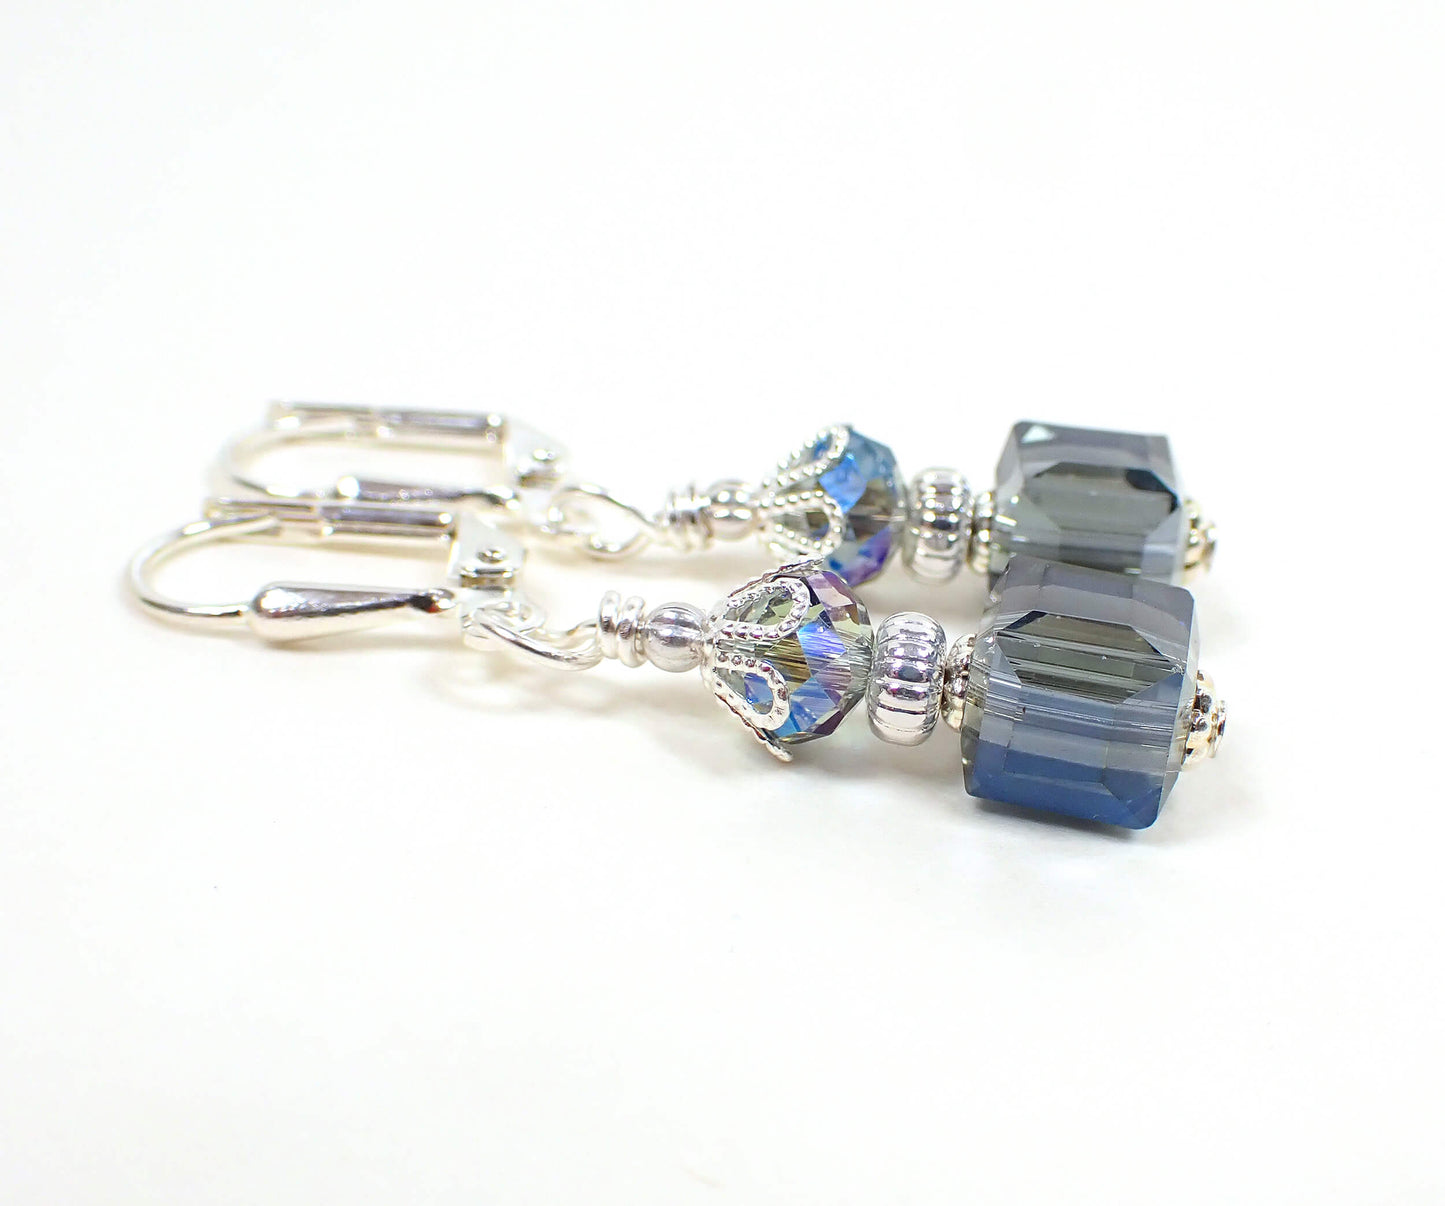 Small Blue Handmade Cube Earrings Silver Plated Hook Lever Back or Clip On